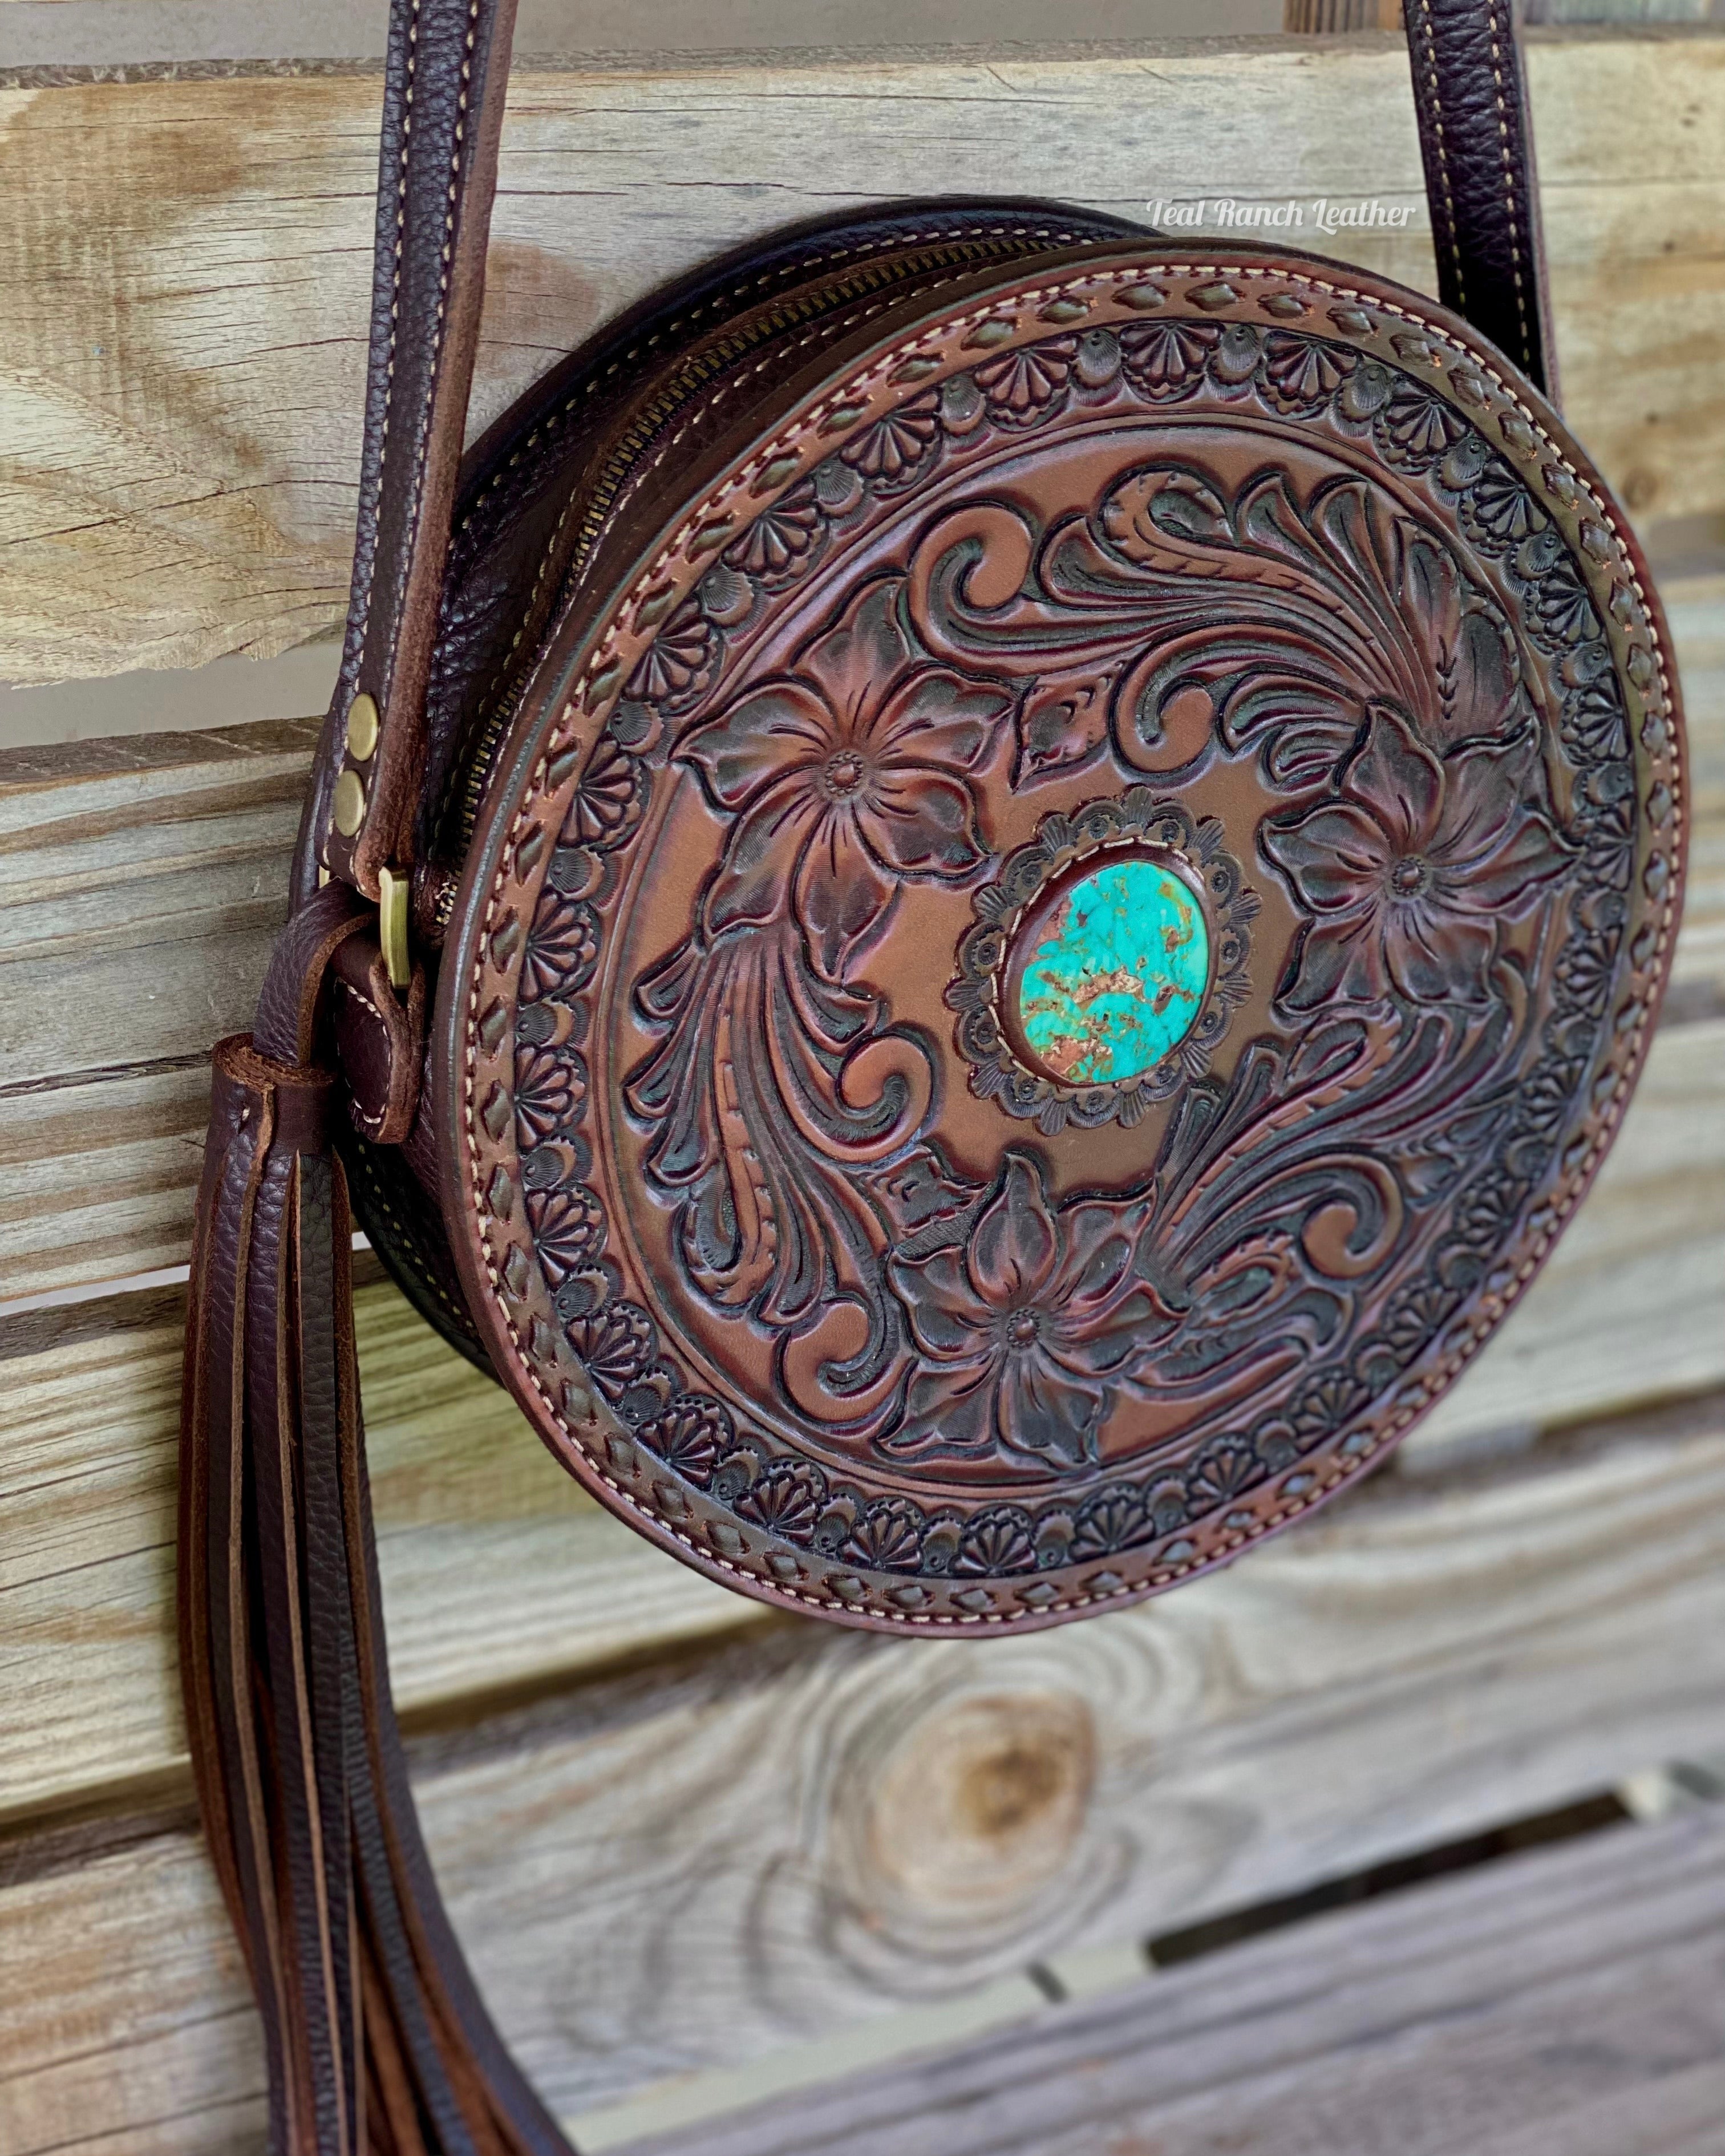 Teal Ranch Leather